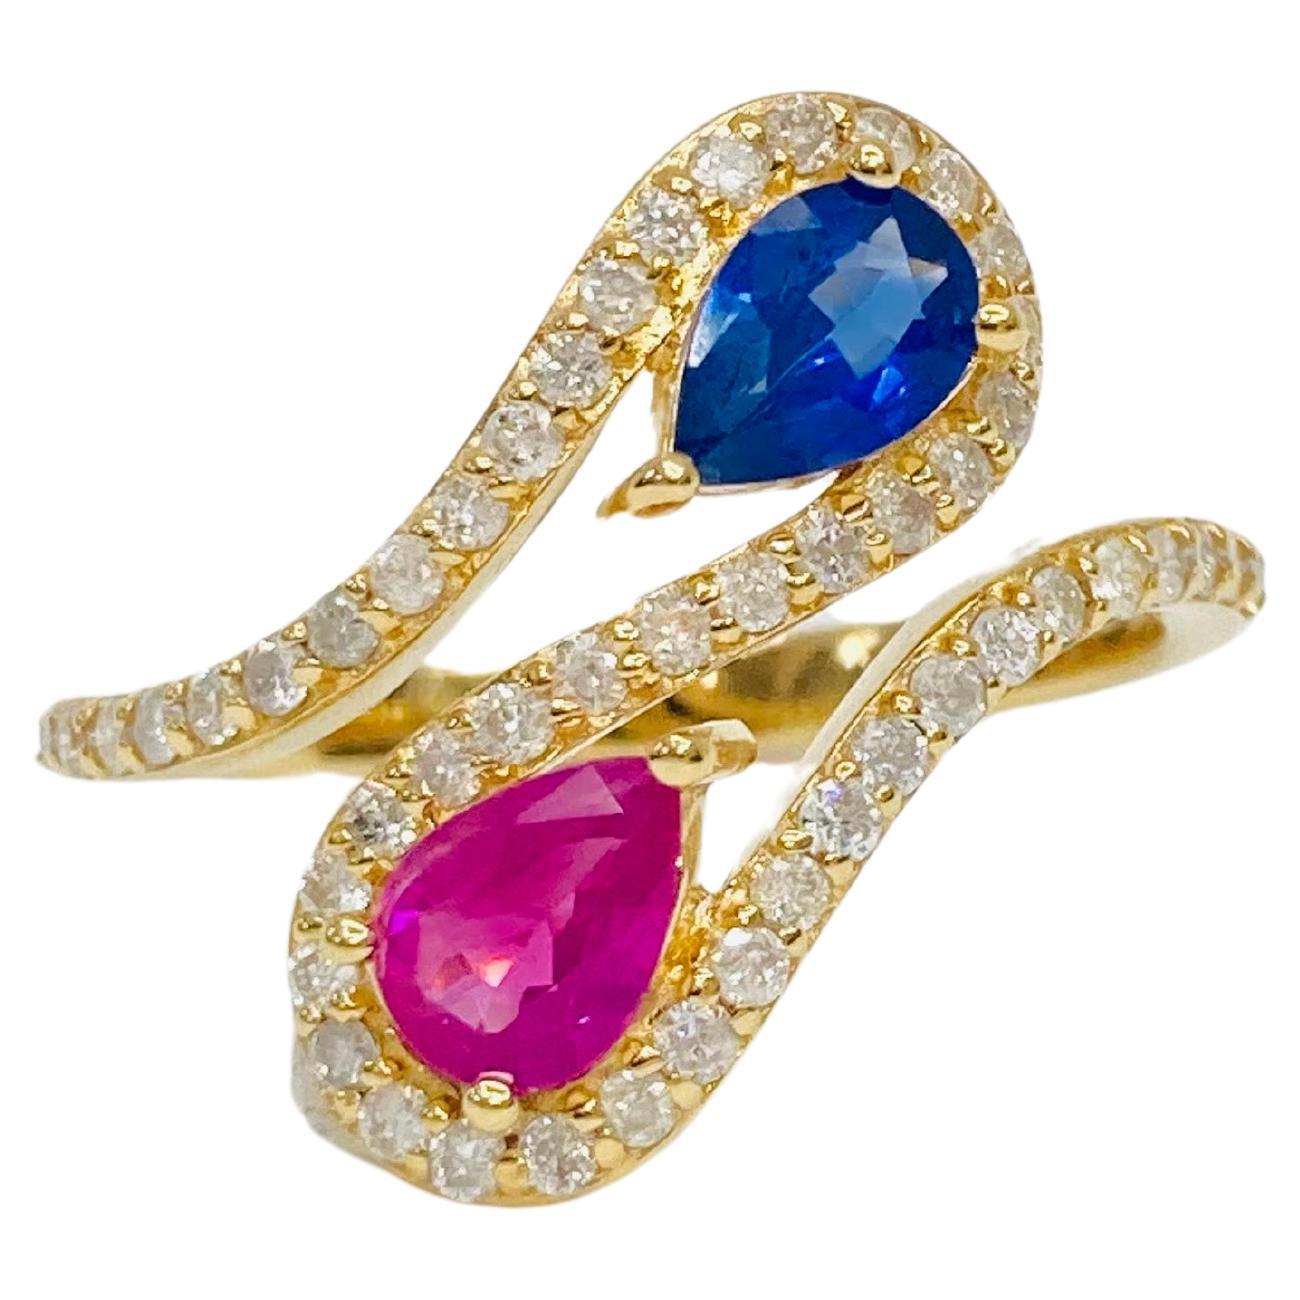 Bochic 2 Color “Retro Vintage” Ruby & Sapphire 18K Gold & Diamond Cluster Ring. For Sale